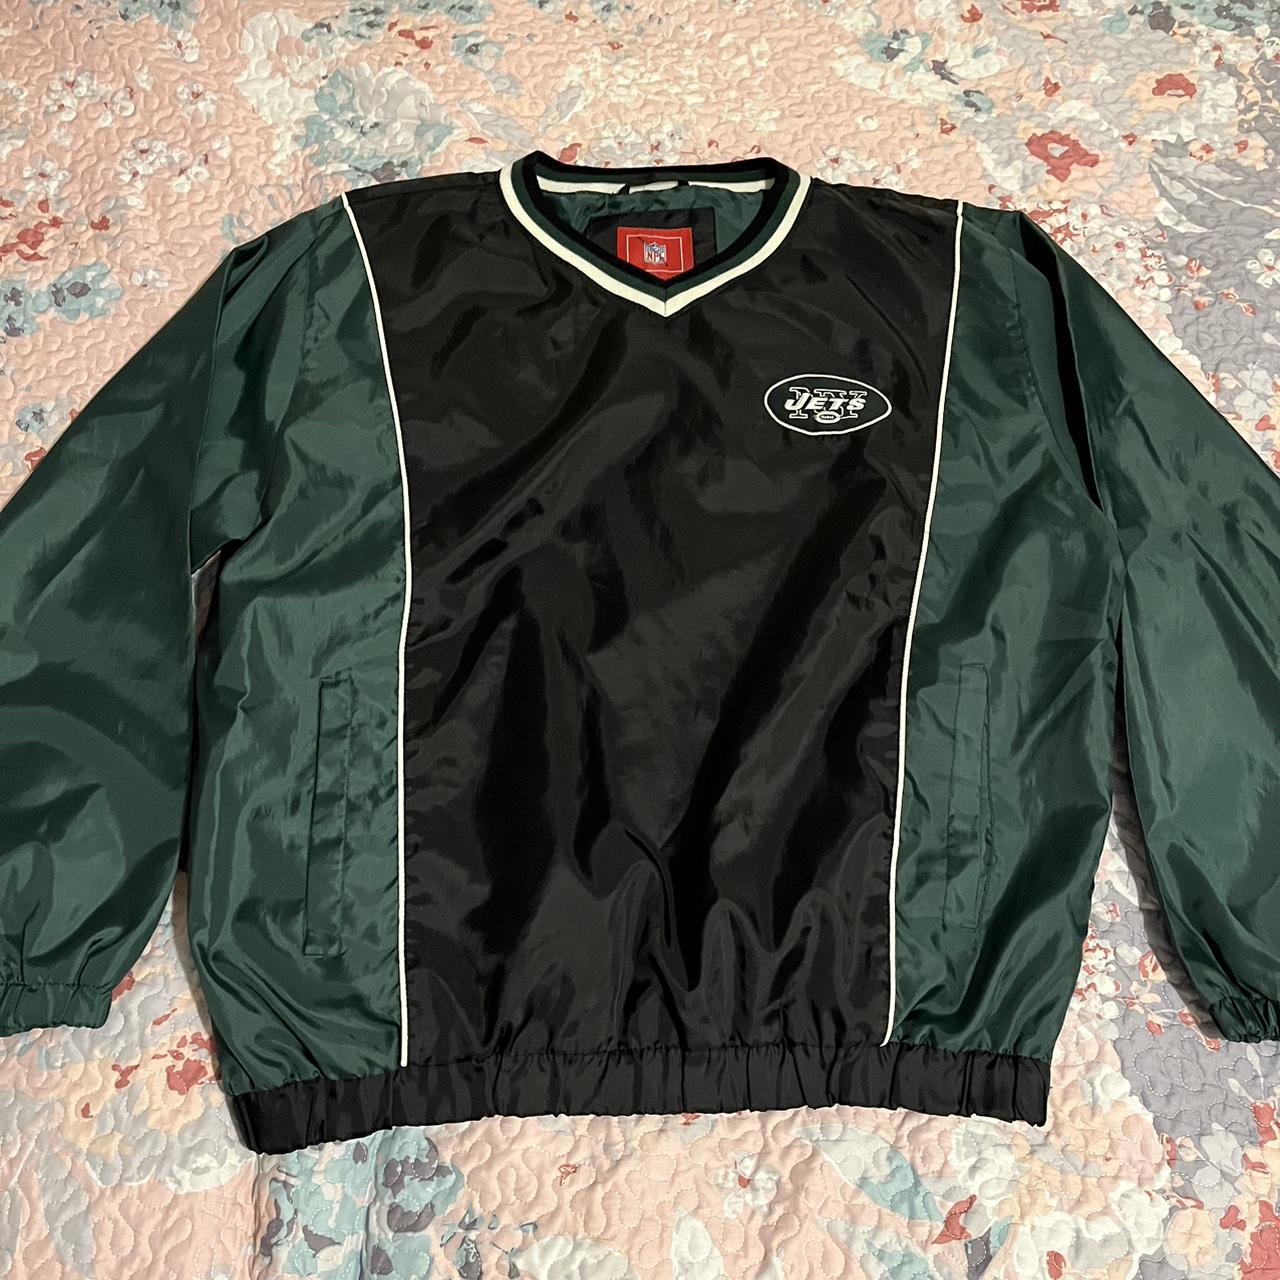 Jets Windbreaker Crewneck XL Extremely small hole as... - Depop